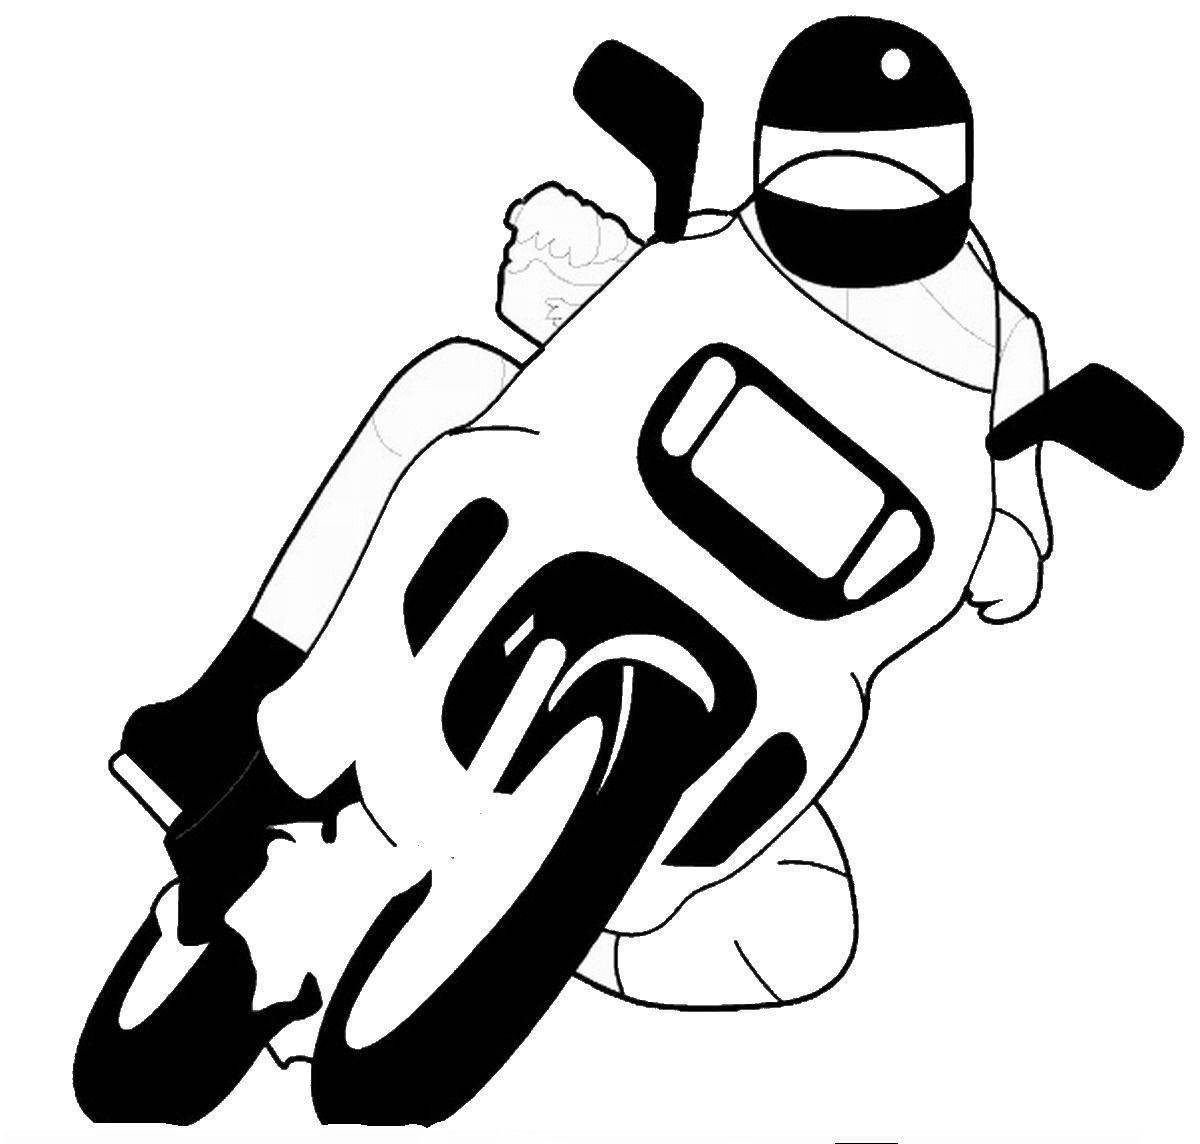 Coloring page cheerful motorcyclist